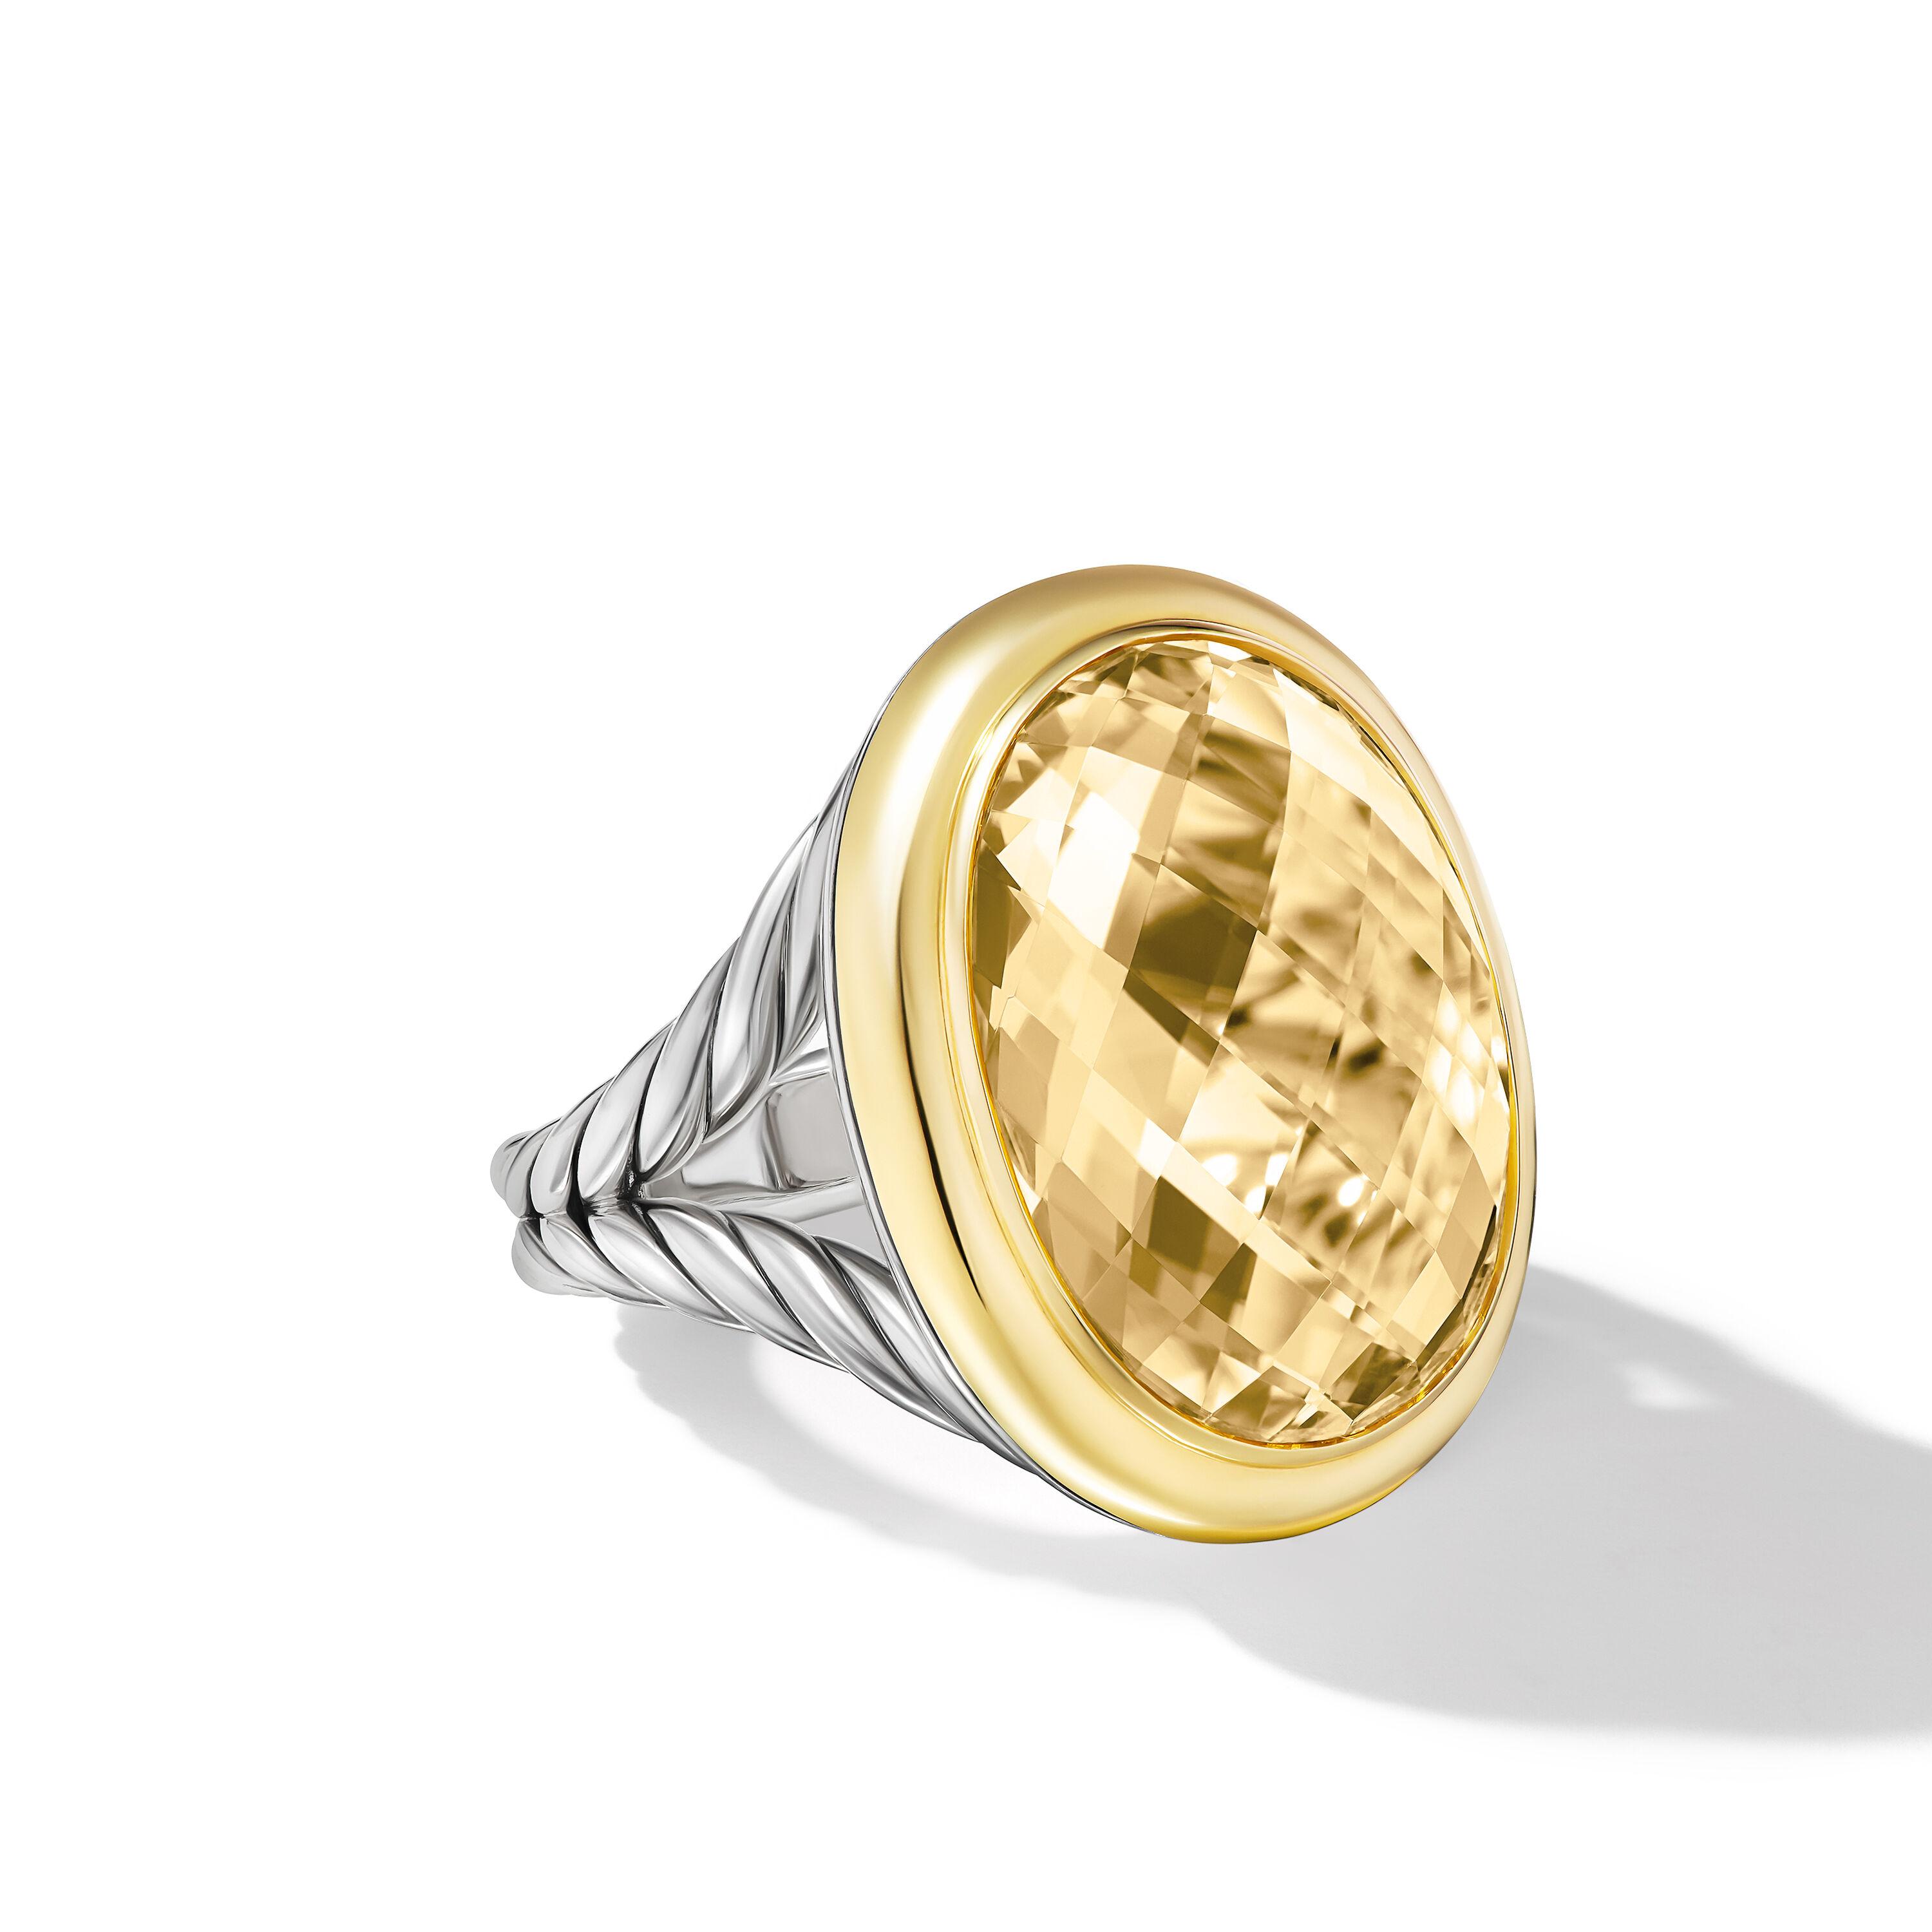 David Yurman Albion Oval Ring in Sterling Silver with 18K Yellow Gold and Champagne Citrine